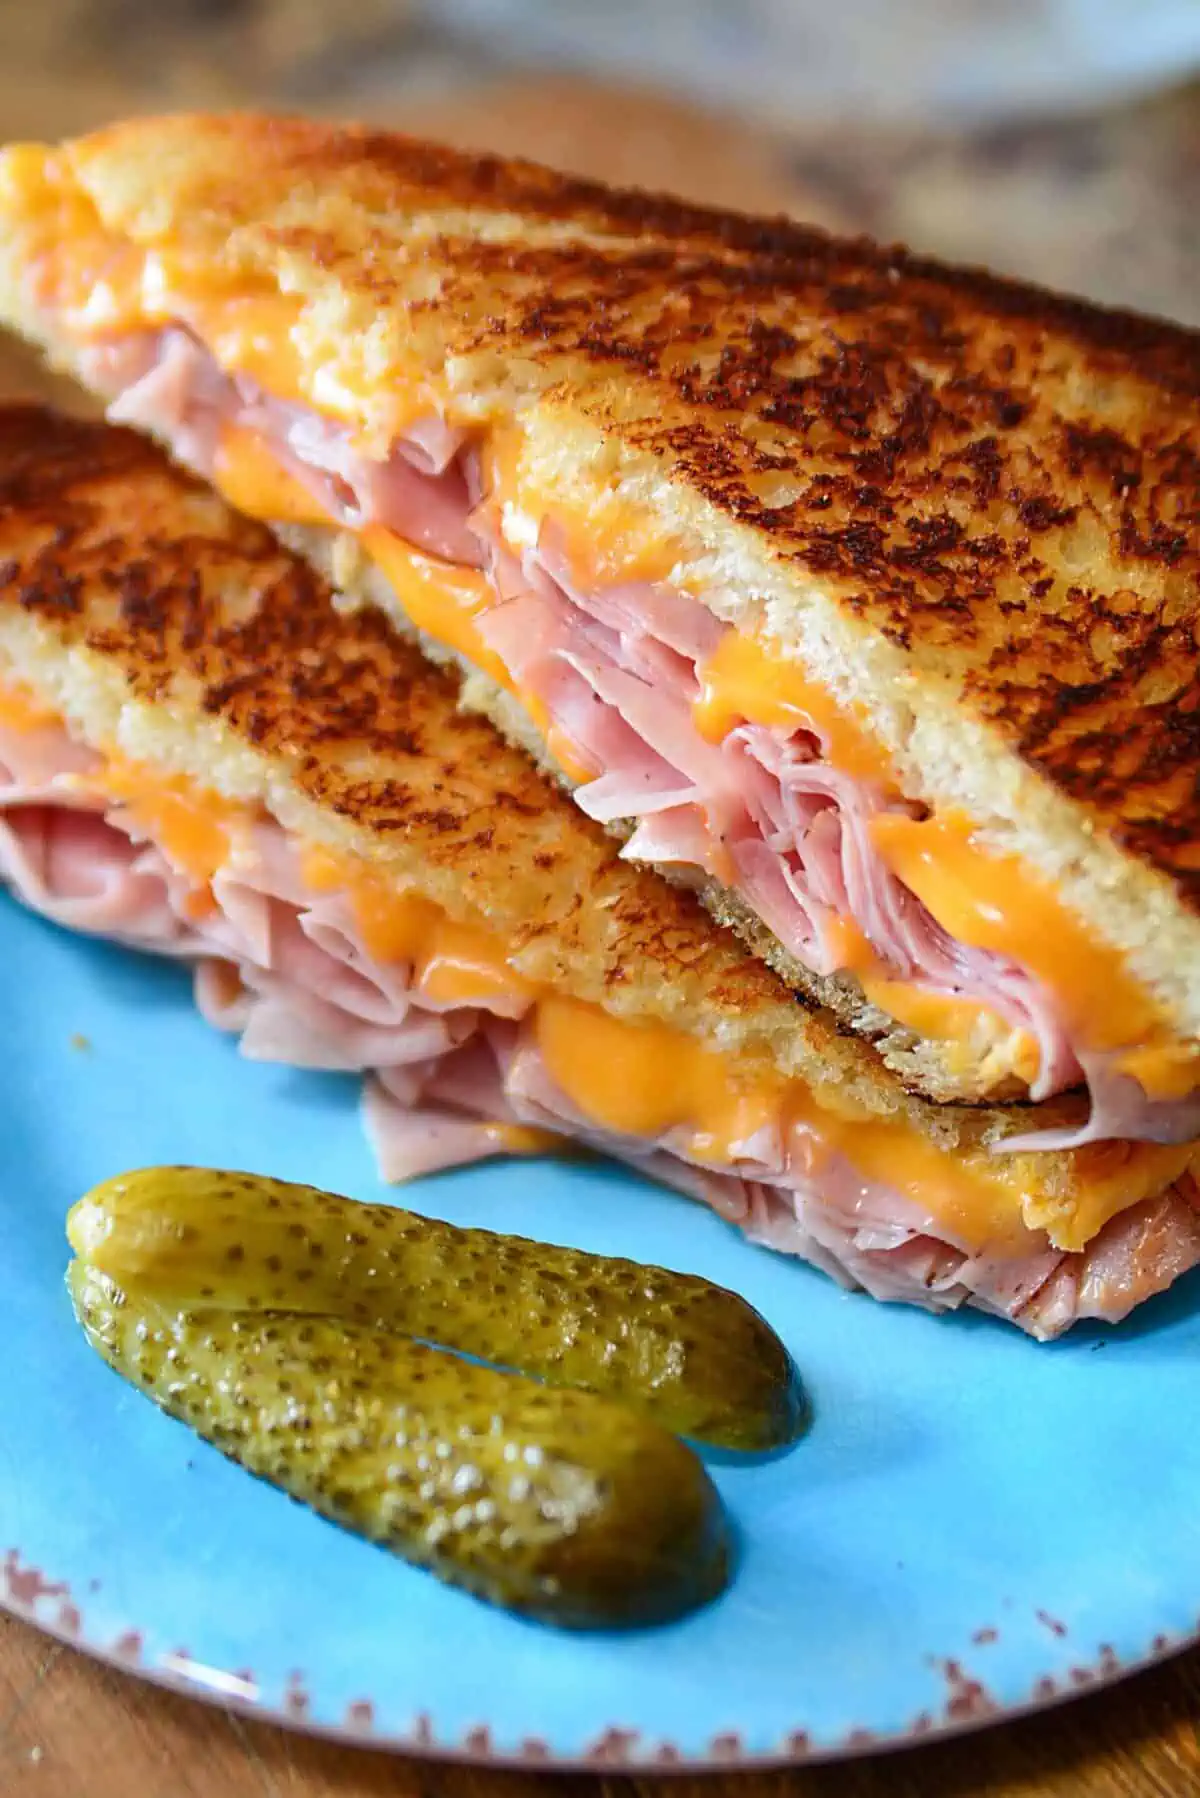 A grilled ham and cheese sandwich cut in half sitting on a blue plate.